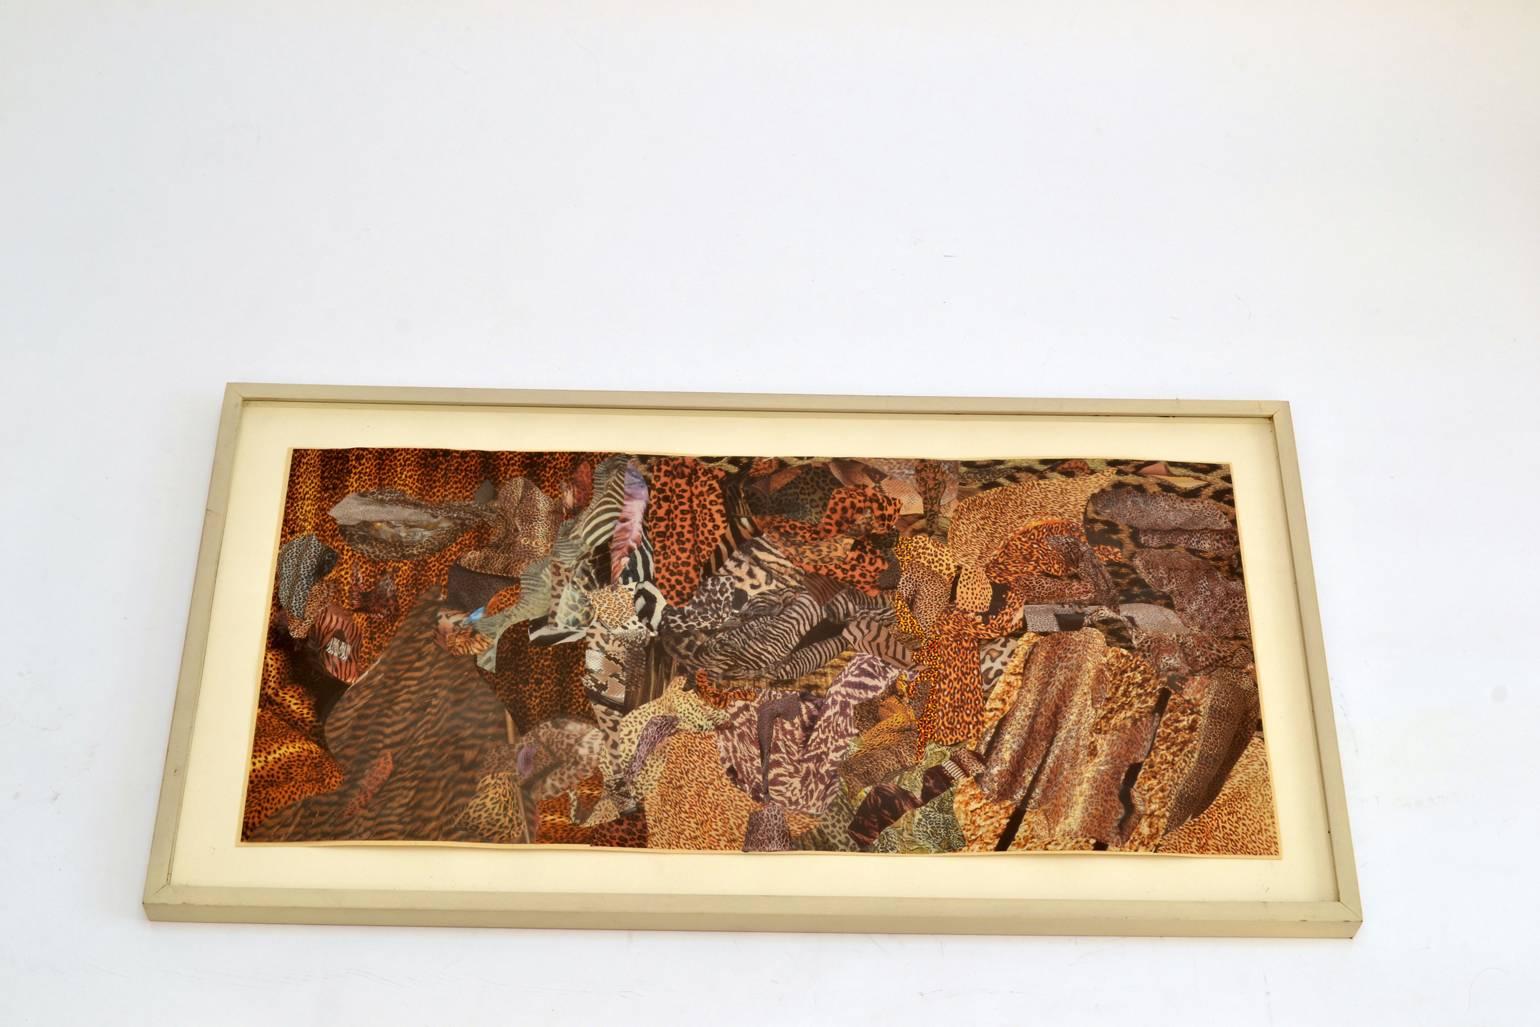 Wood Abstract Collage Art in Brown by Bill Allan, UK, 1993 For Sale